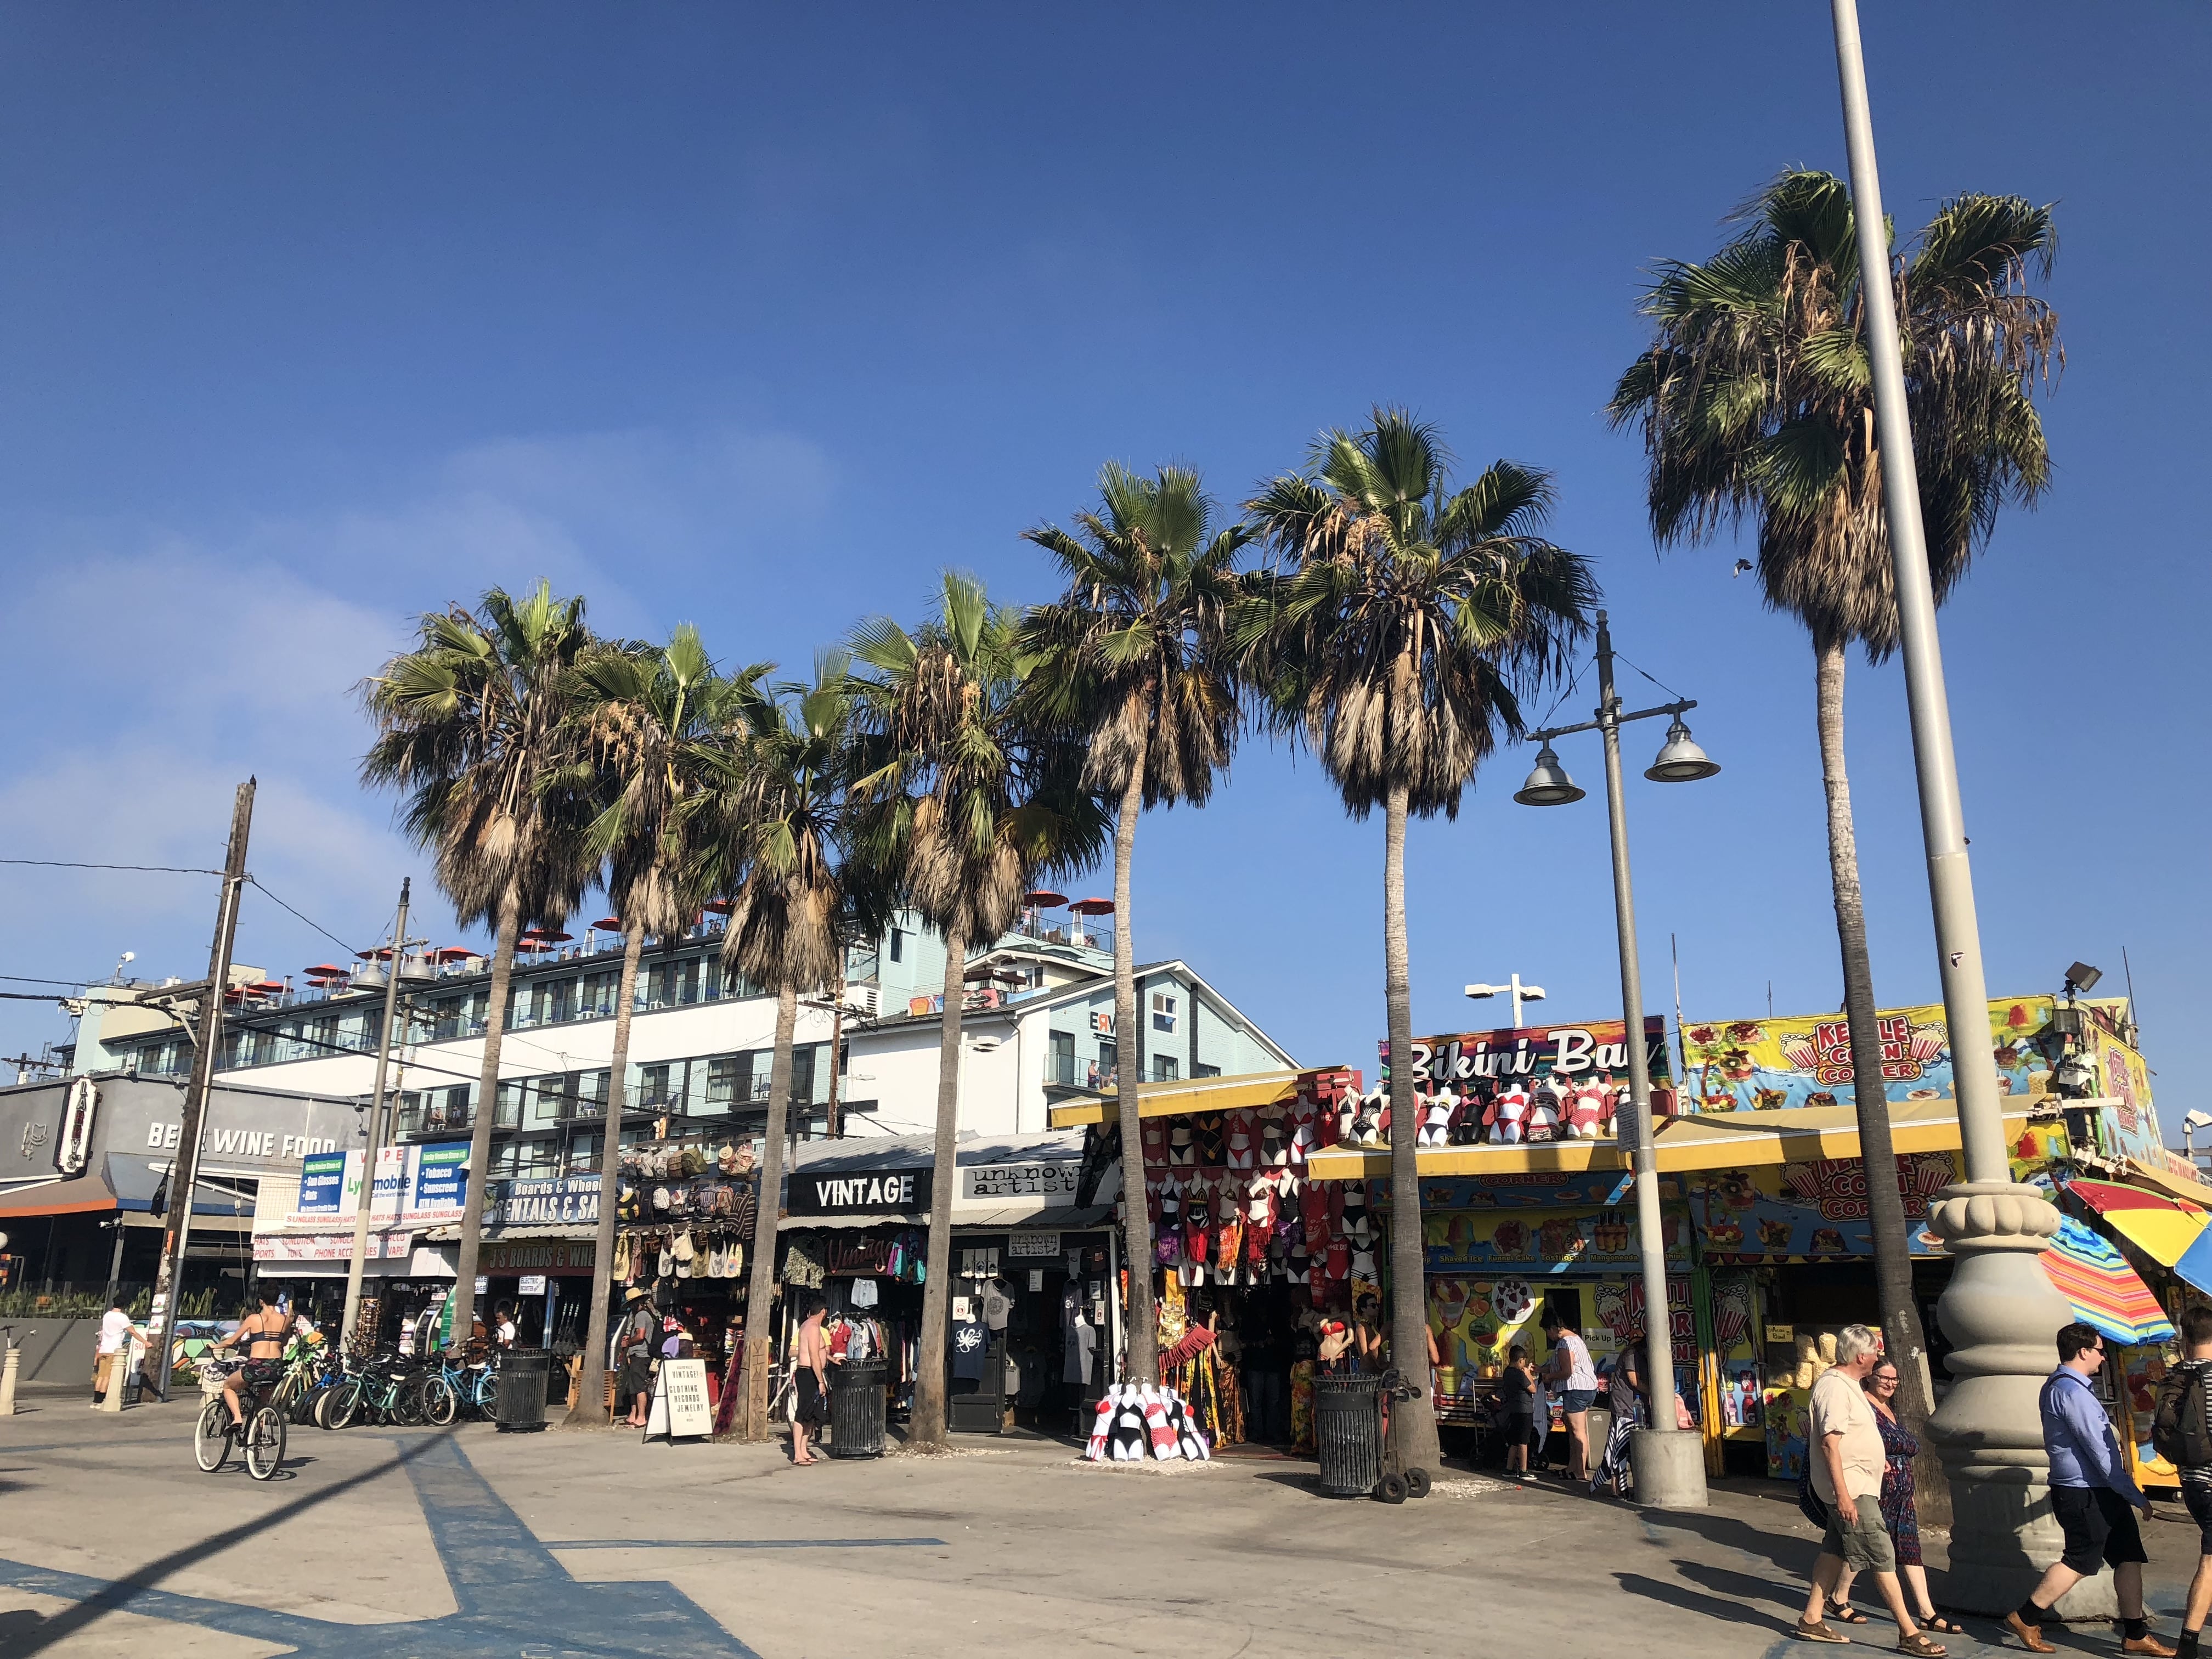 What You Should Know For a Most Excellent Time in Venice Beach Honey and Figs